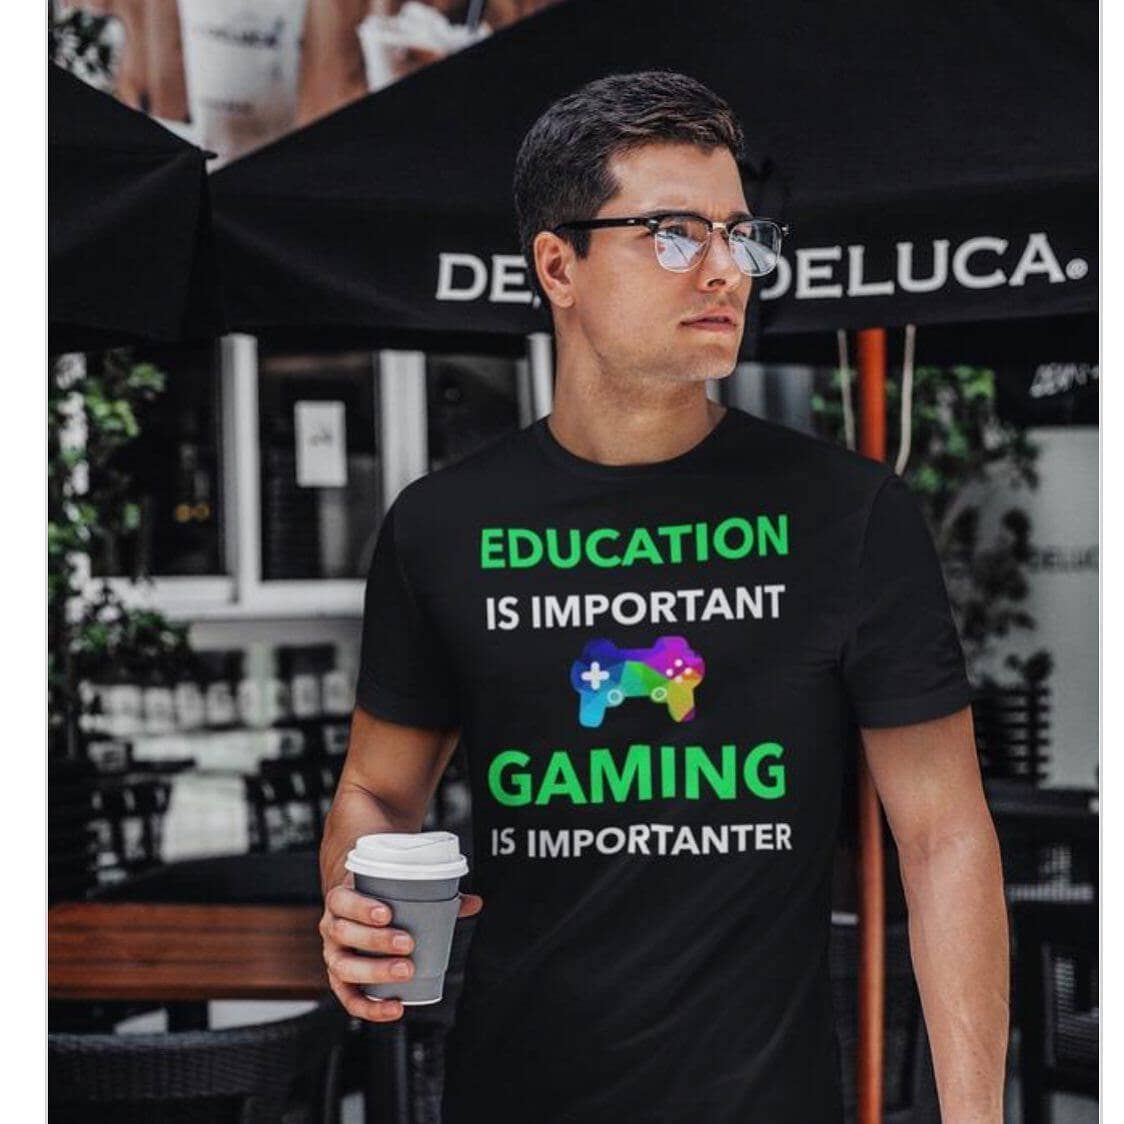 Gamers know that Gaming is...